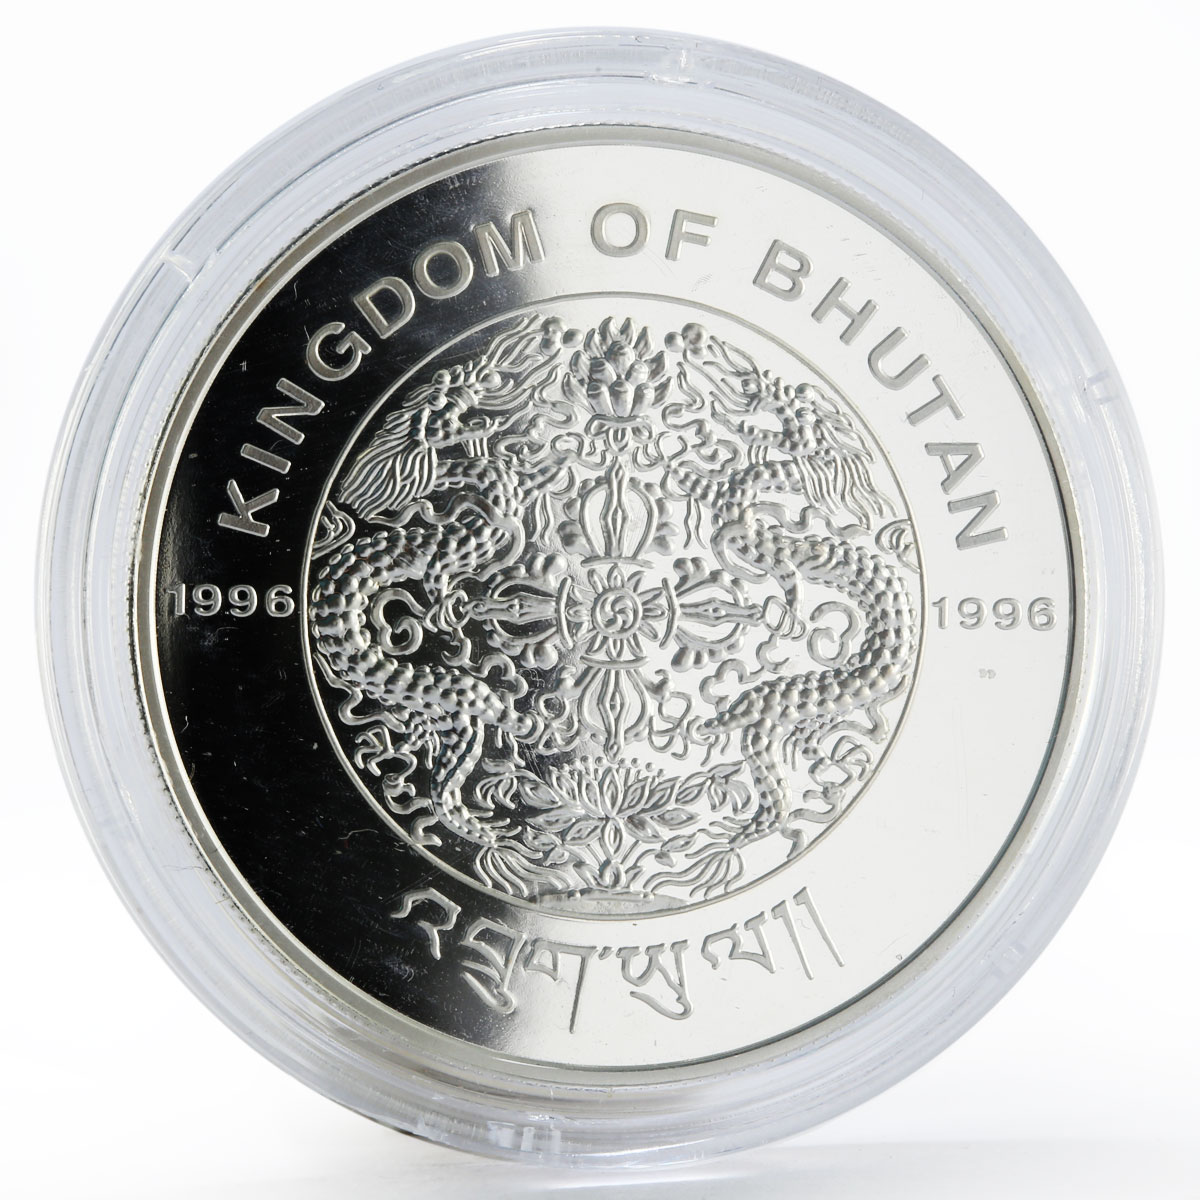 Bhutan 300 ngultrums Year of the Sheep proof silver coin 1996